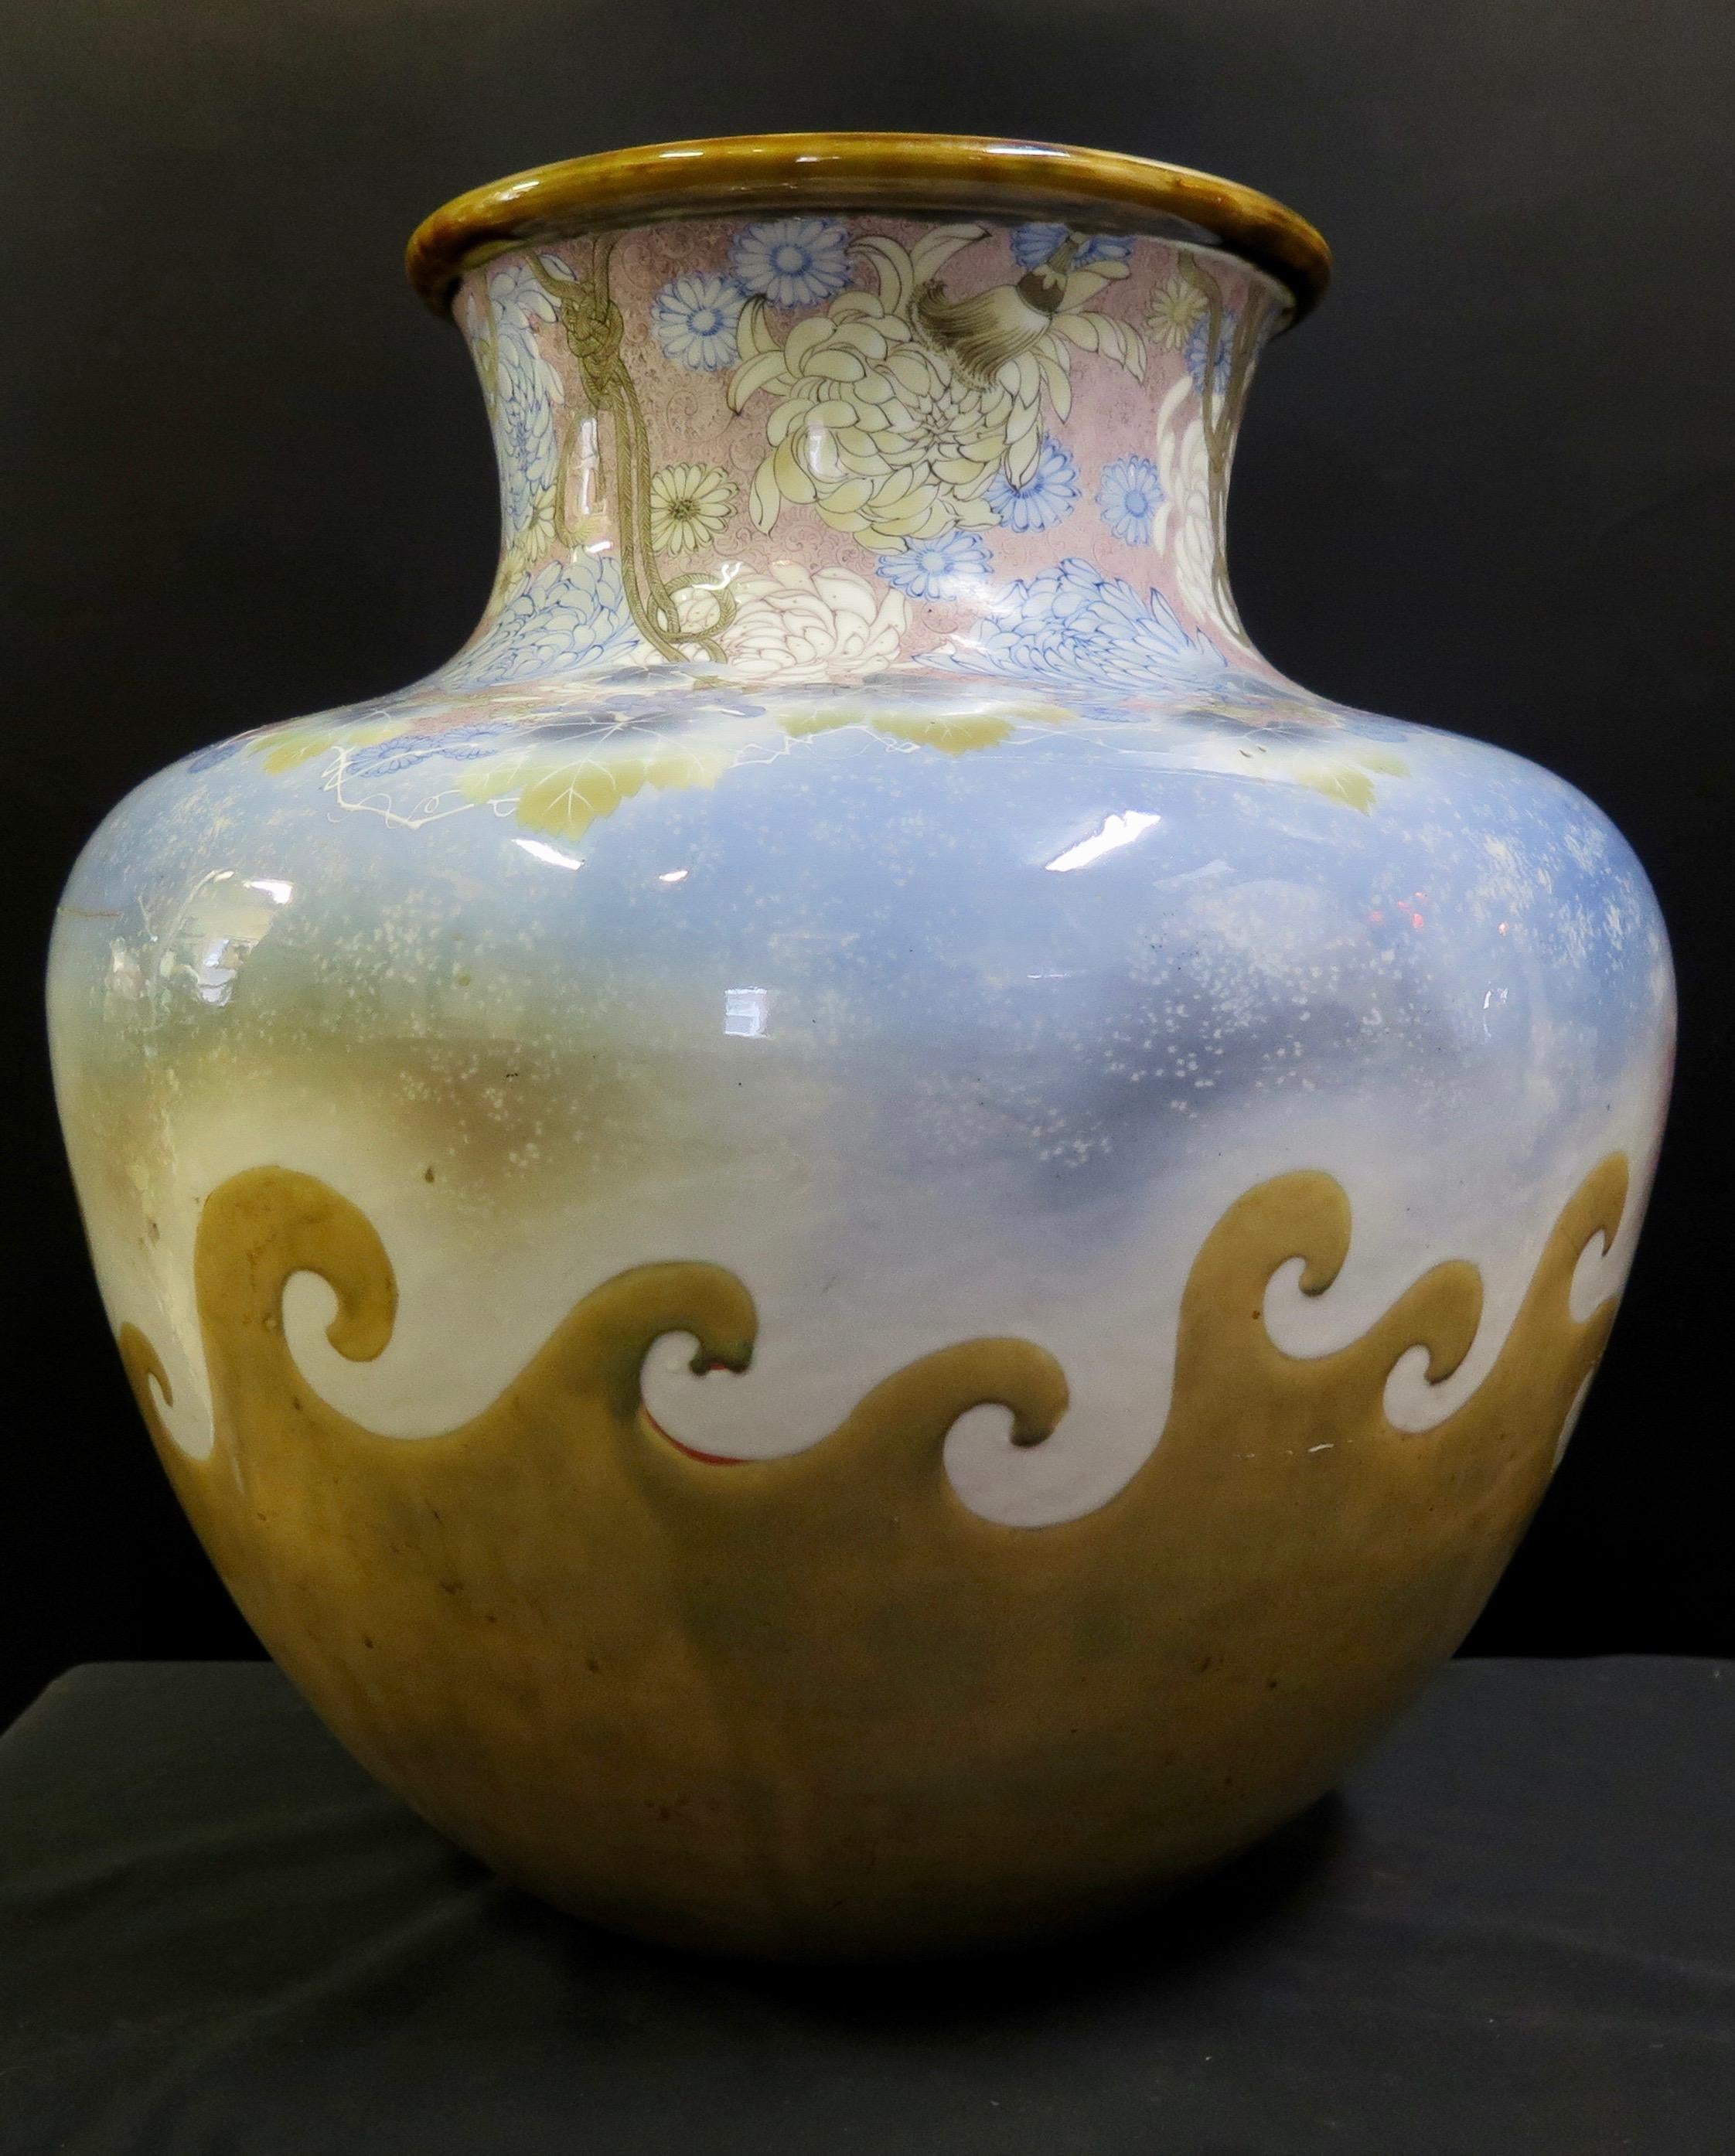 This wonderful vintage Japanese Seto porcelain ware jar decorated with color under-the-glaze. The stamped mark on the base is Kawamoto Masukichi II (1852-1918) the vase is designed in subtle blue, mauve, okra and white colorations highlighting the